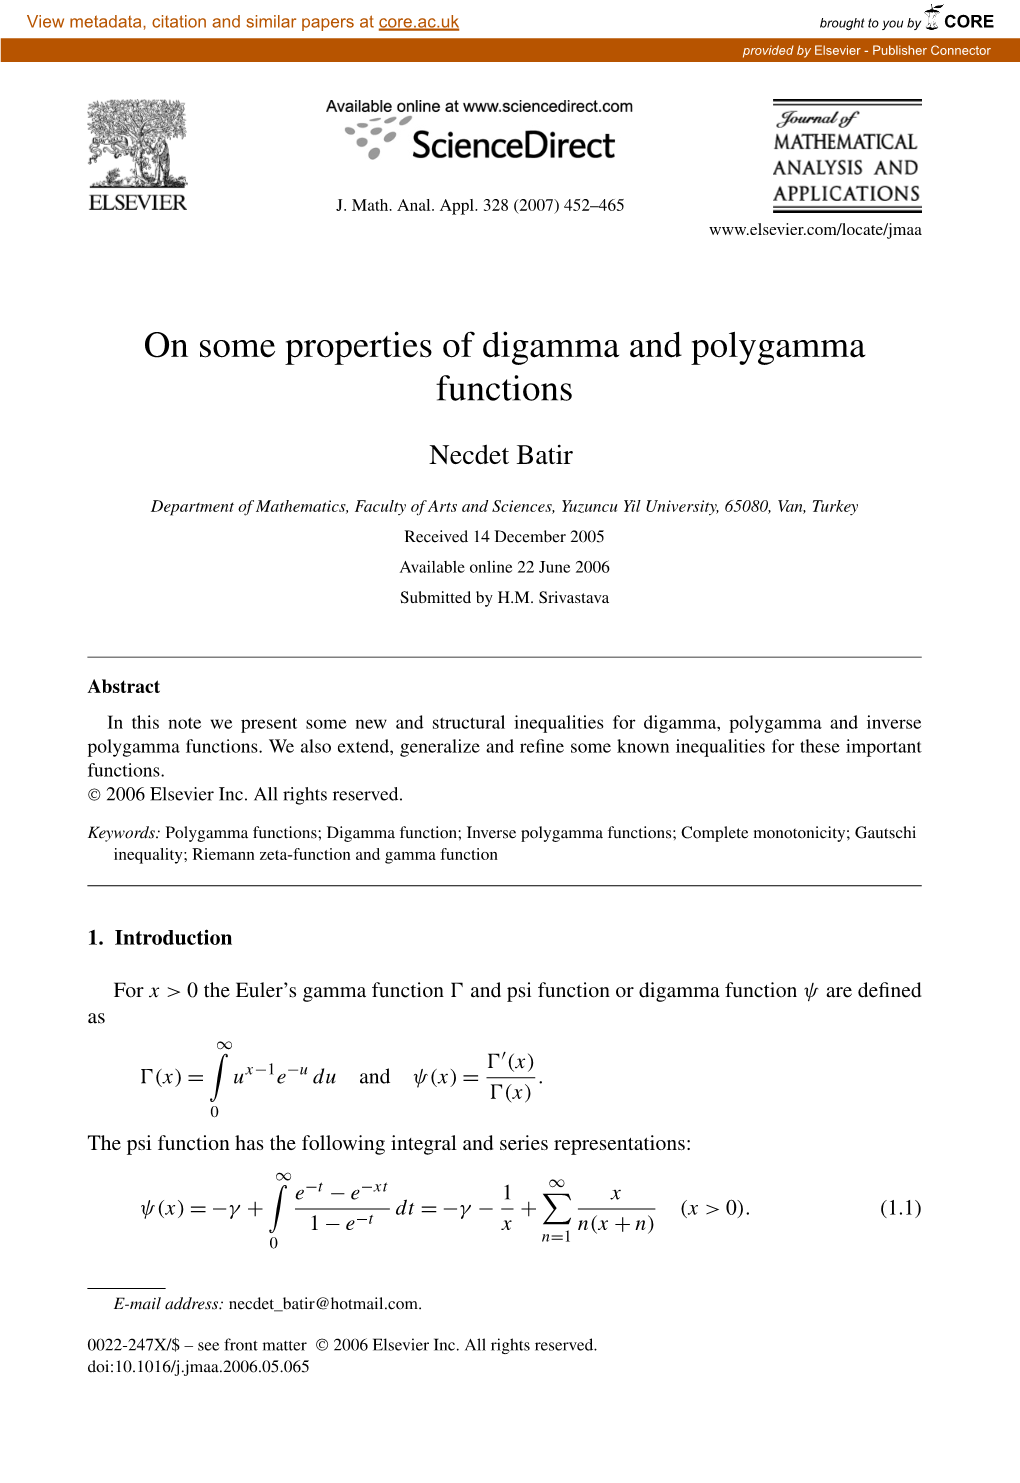 On Some Properties of Digamma and Polygamma Functions